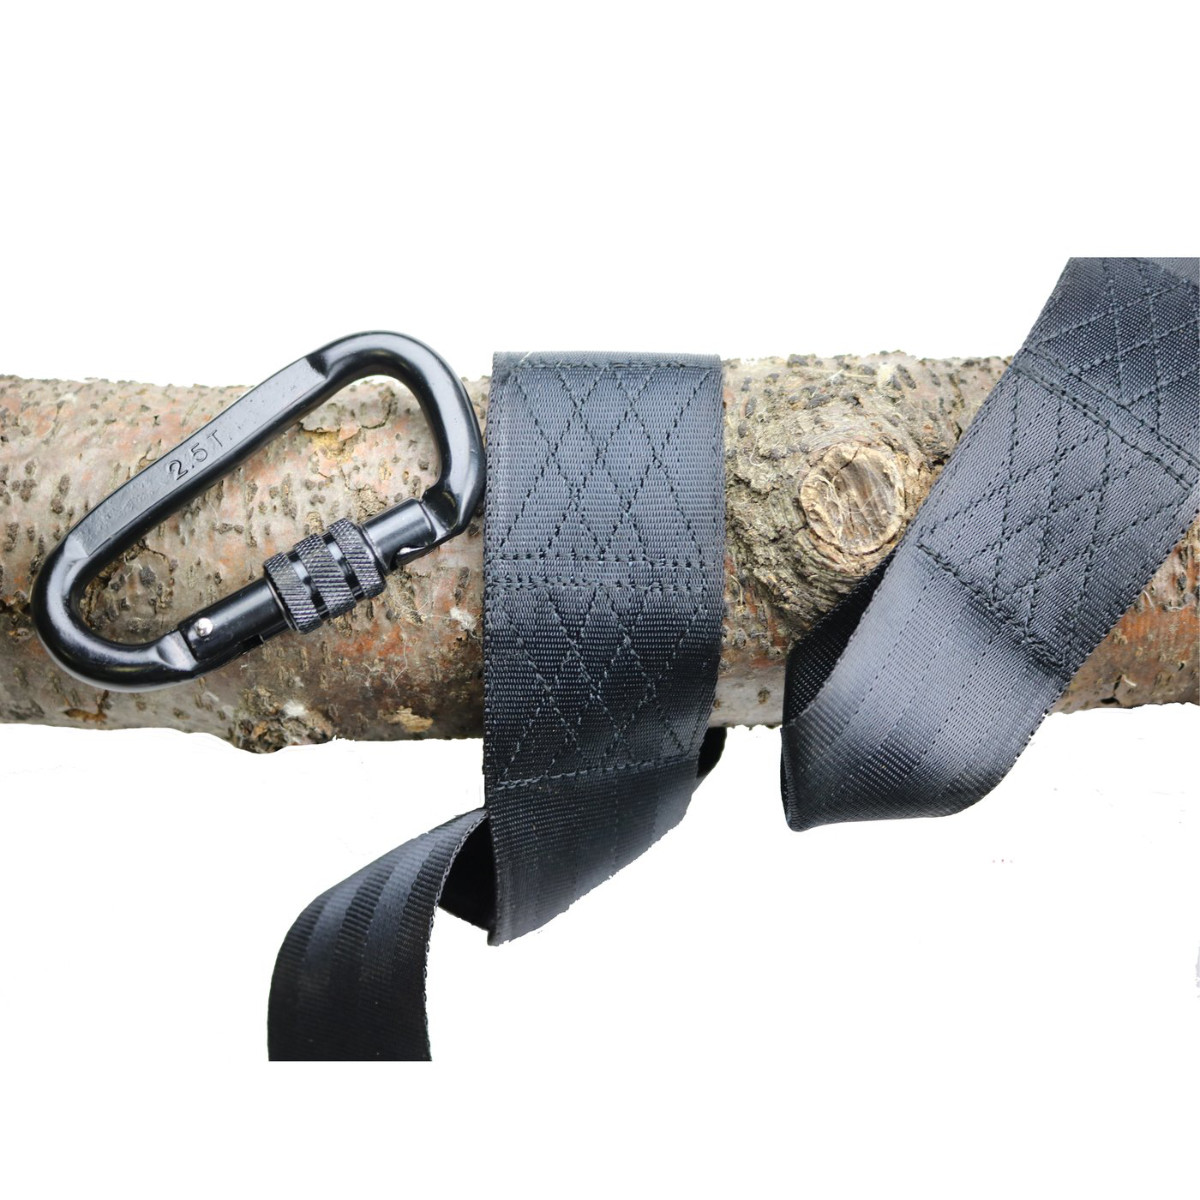  10 ft Tree Swing Strap with Carabiner (MM00149)